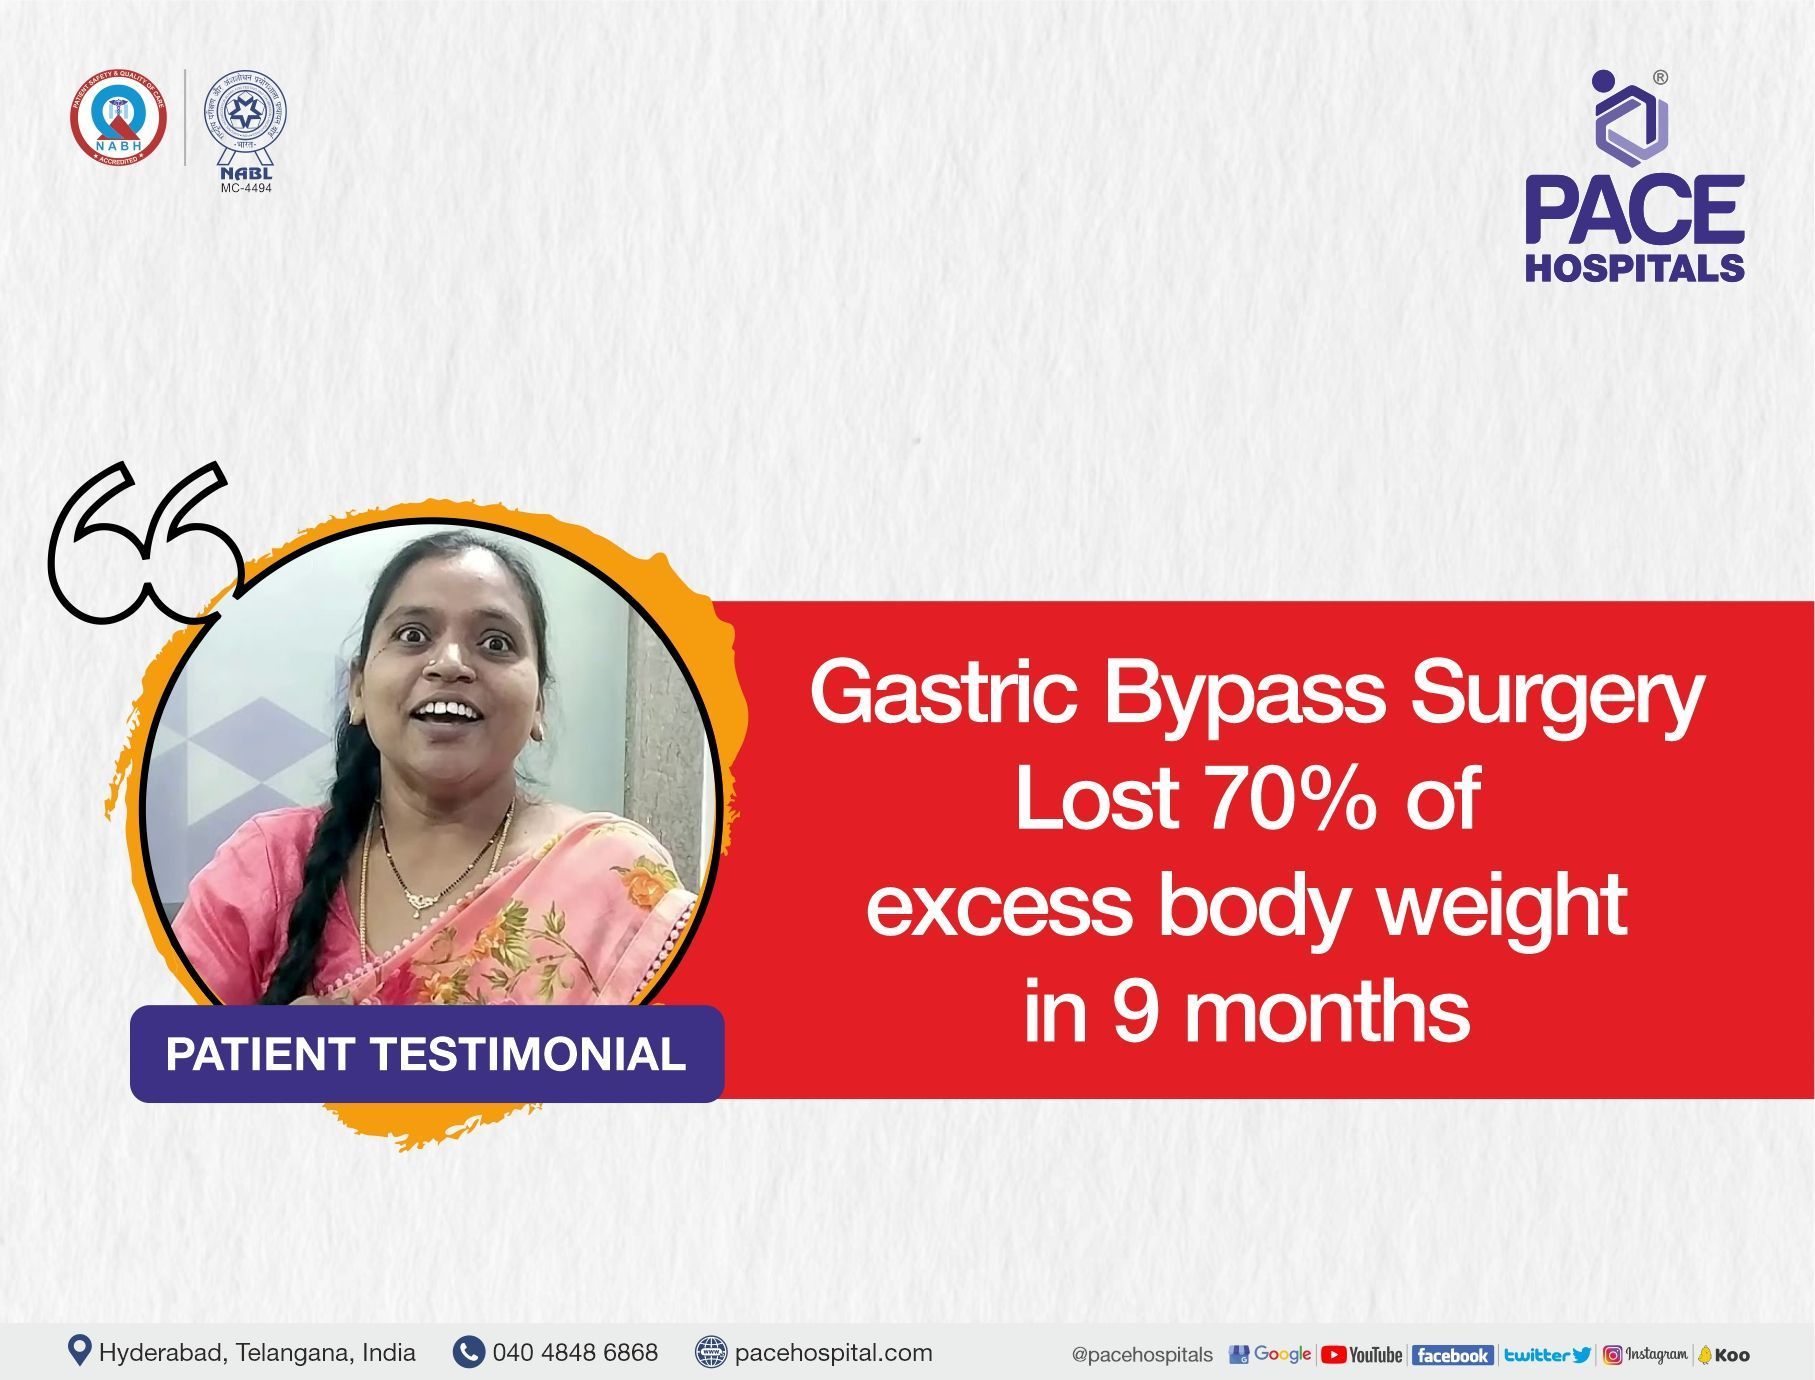 Gastric Bypass Surgery for weight-loss - Lost 70% of excess body weight in 9 months